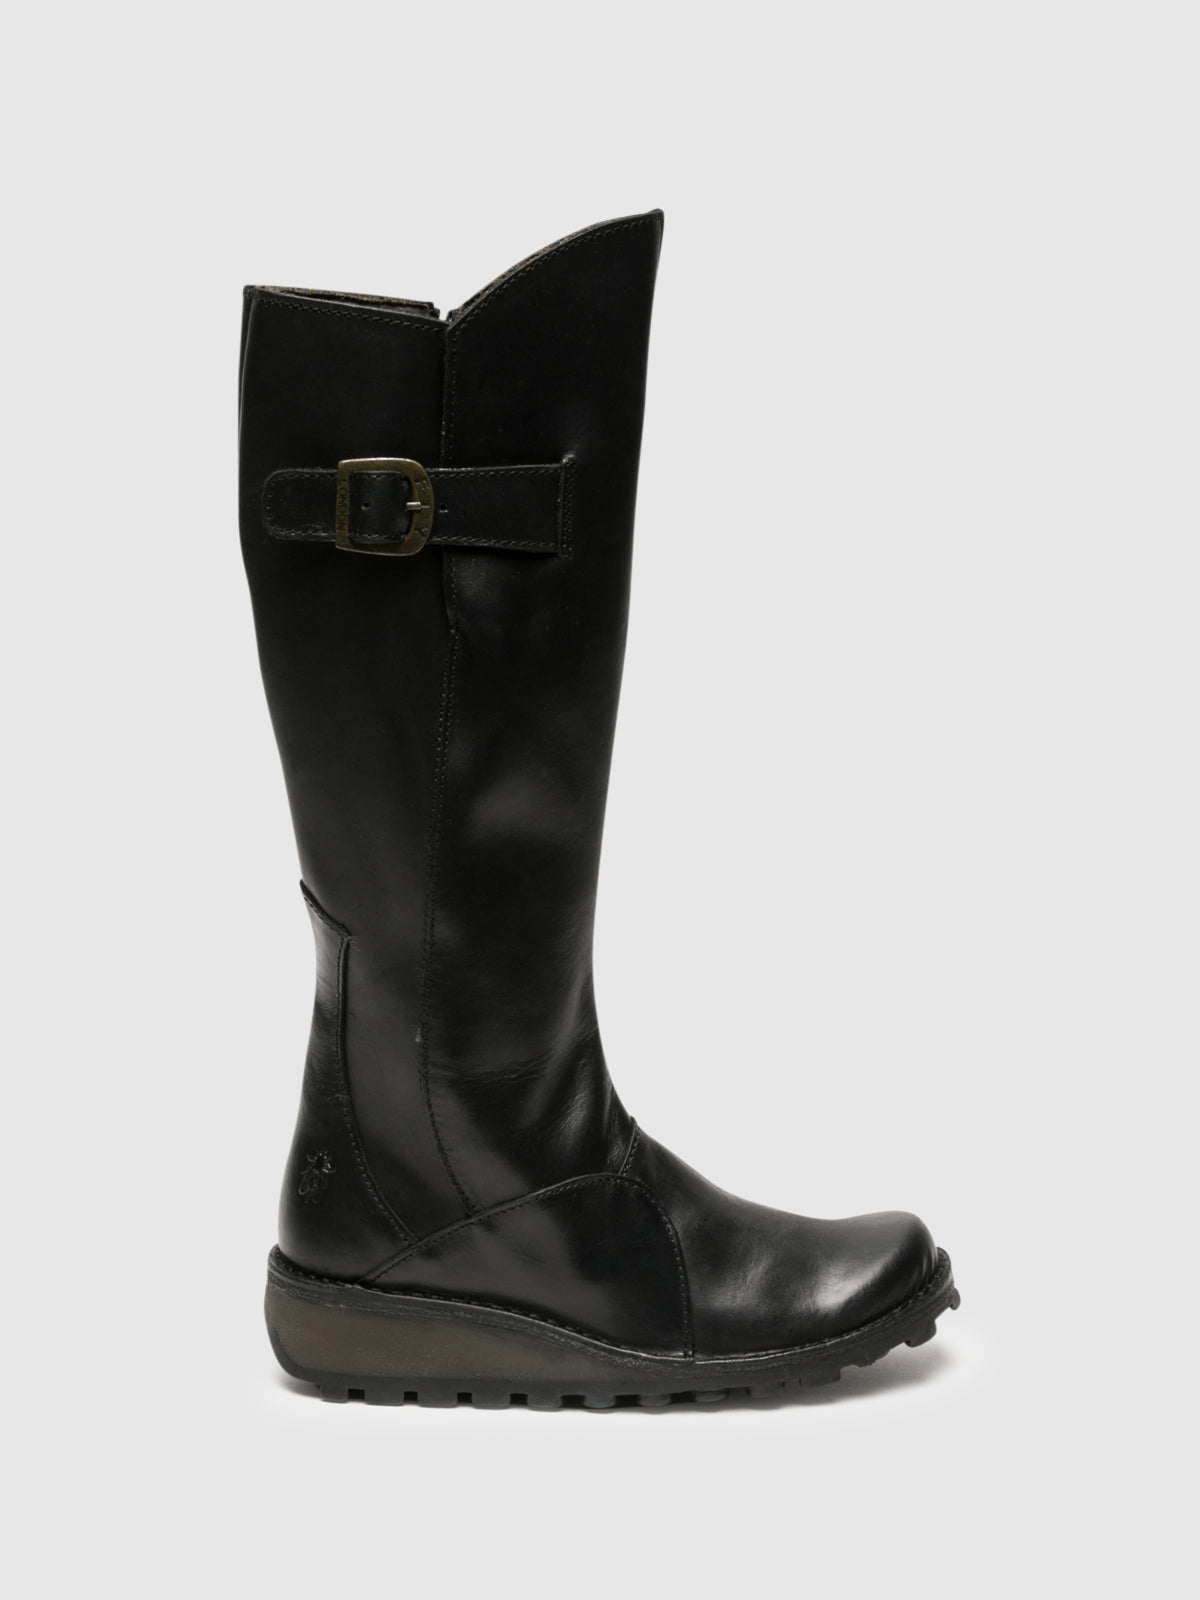 Fly London Coal Black Zip Up Boots